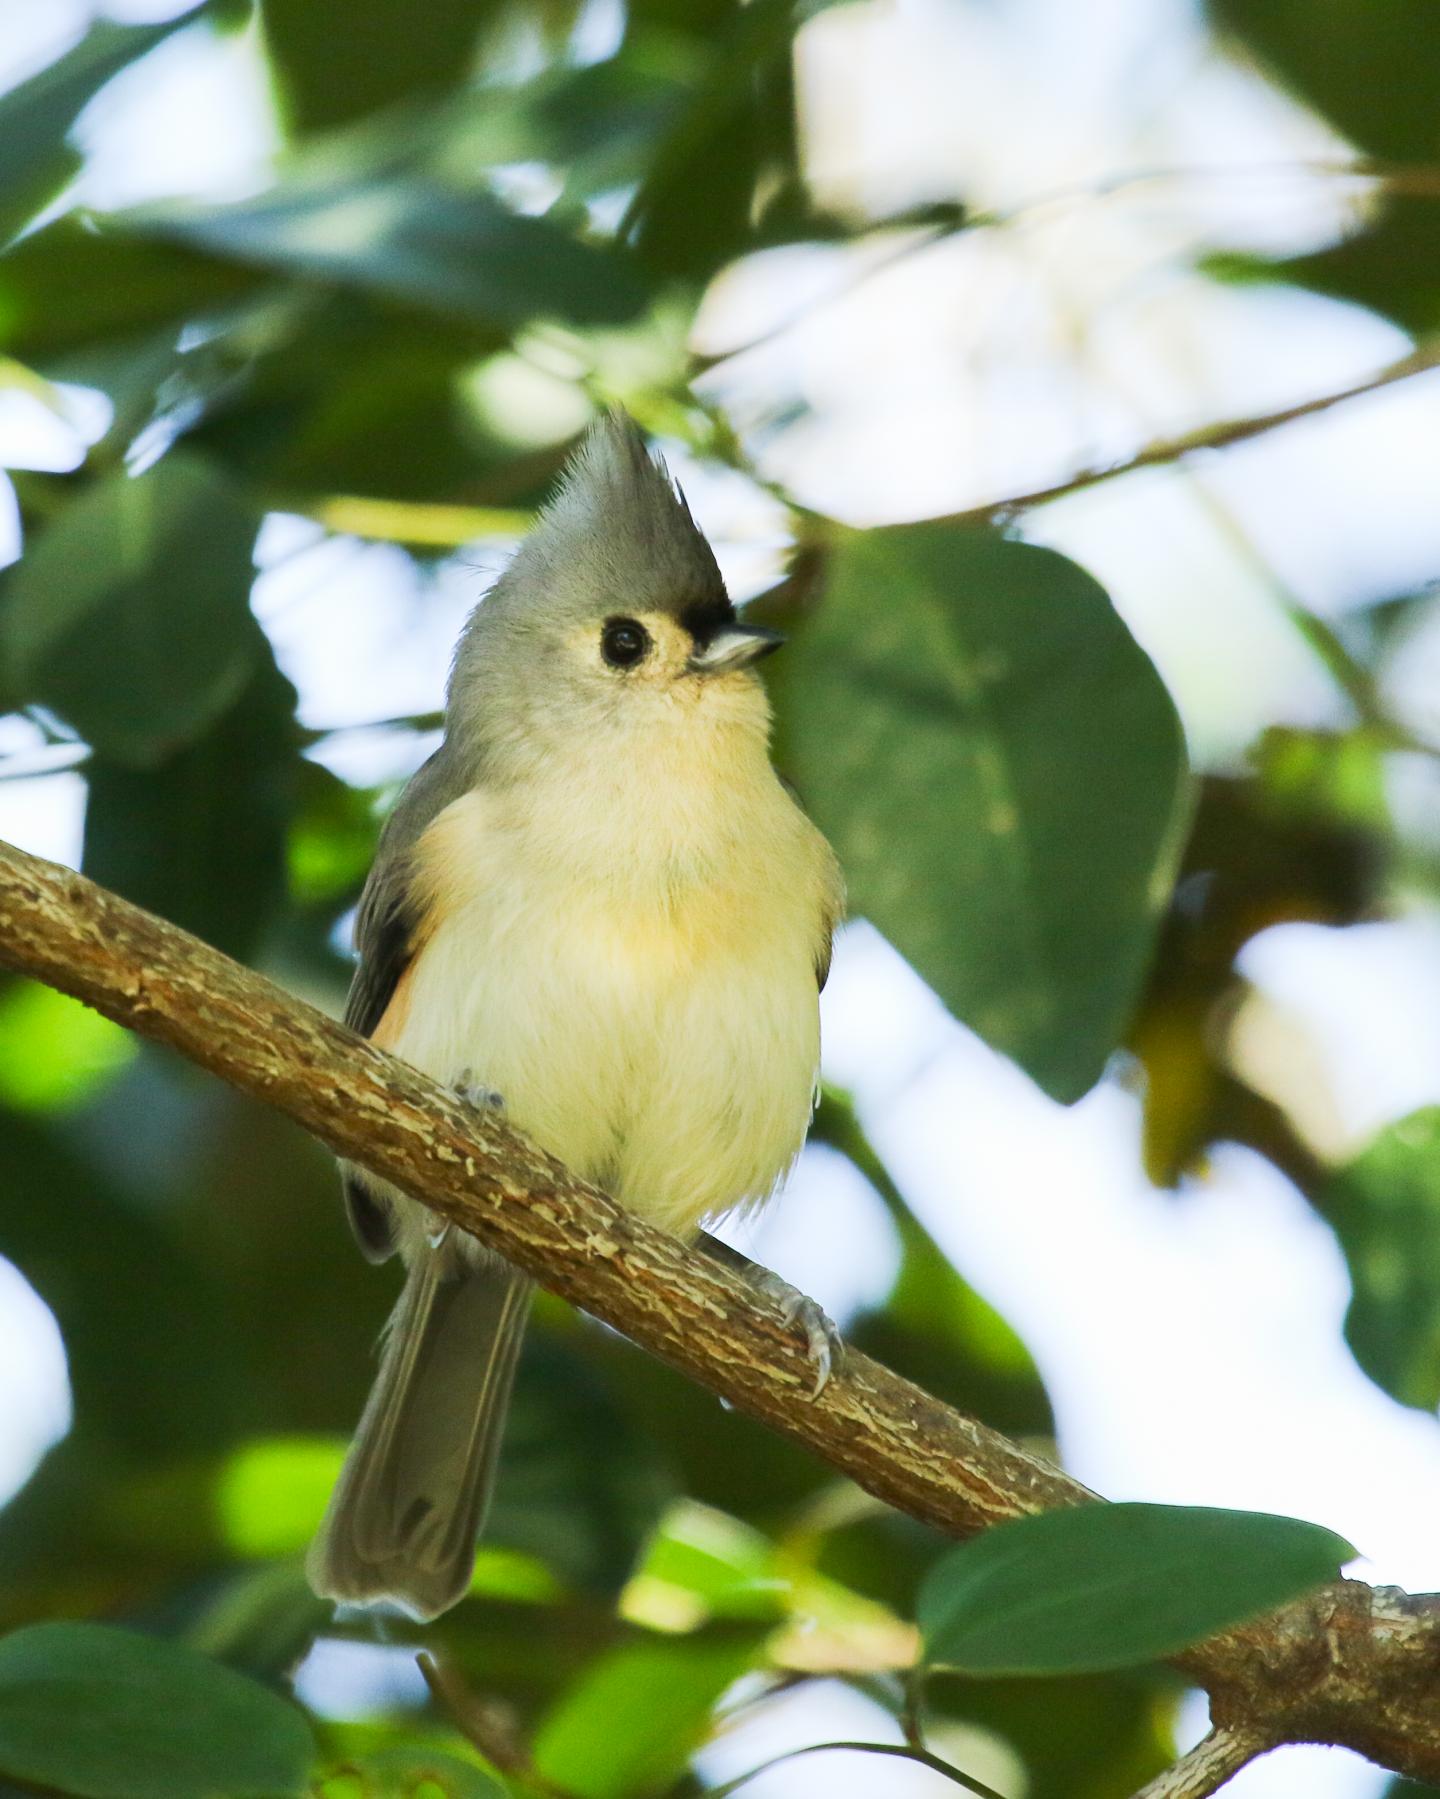 Tufted Titmouse Rules the Roost